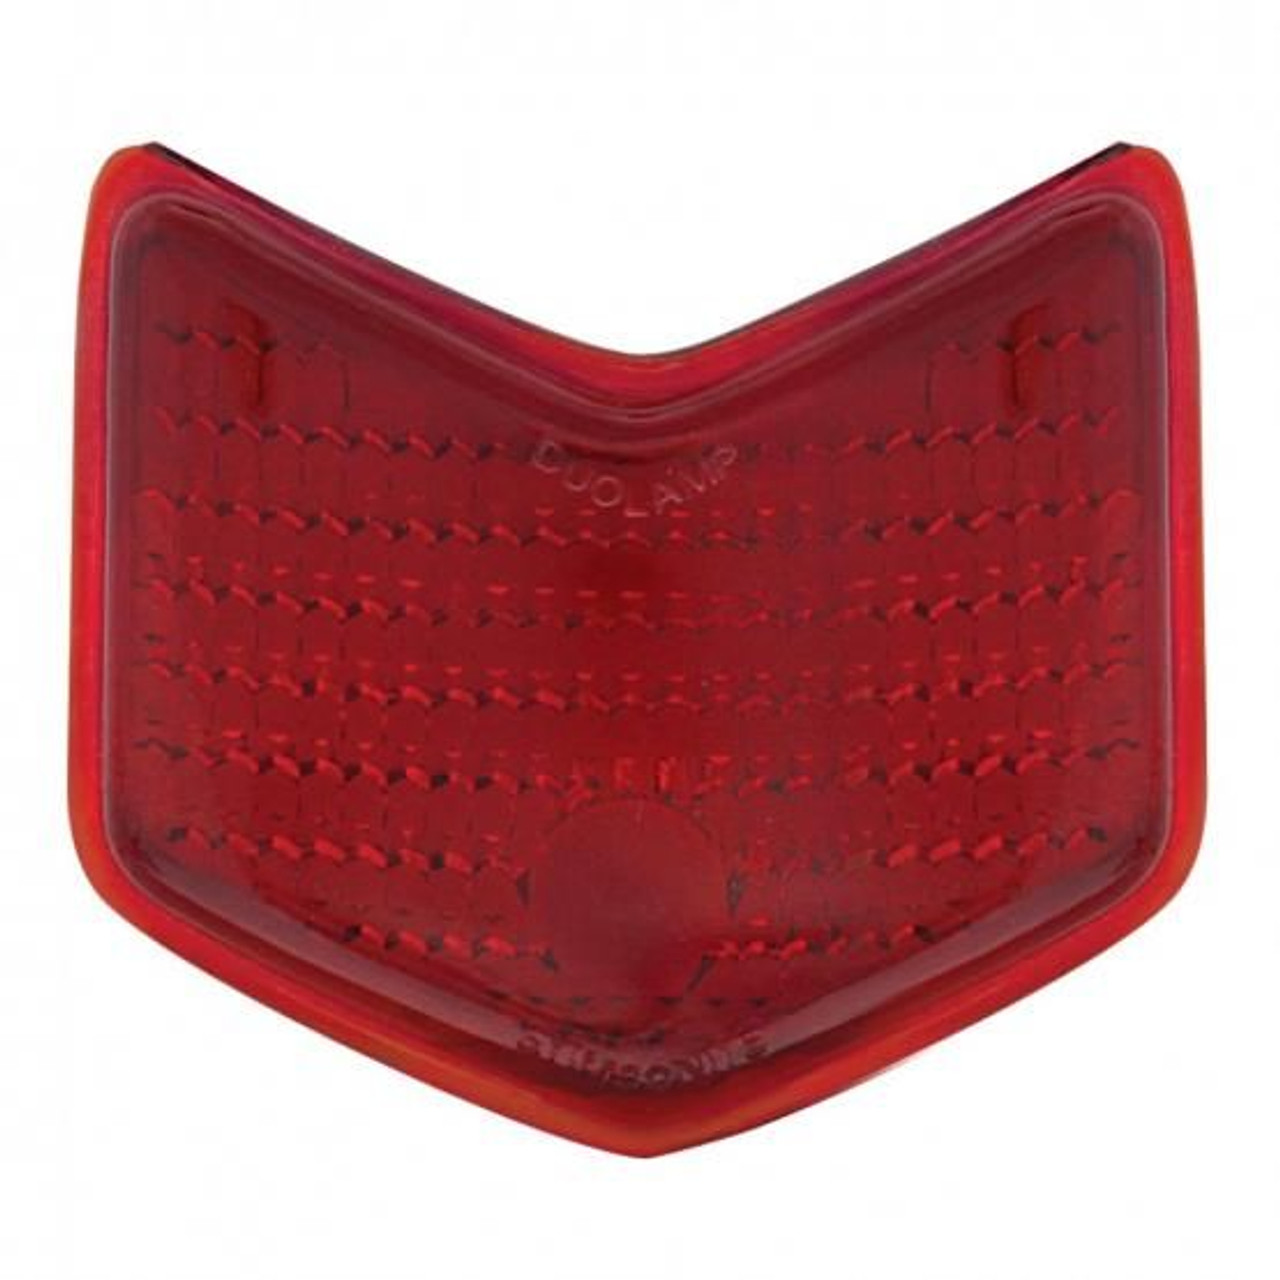 United Pacific  Glass Tail Light Lens For 1940 Ford Passenger Car